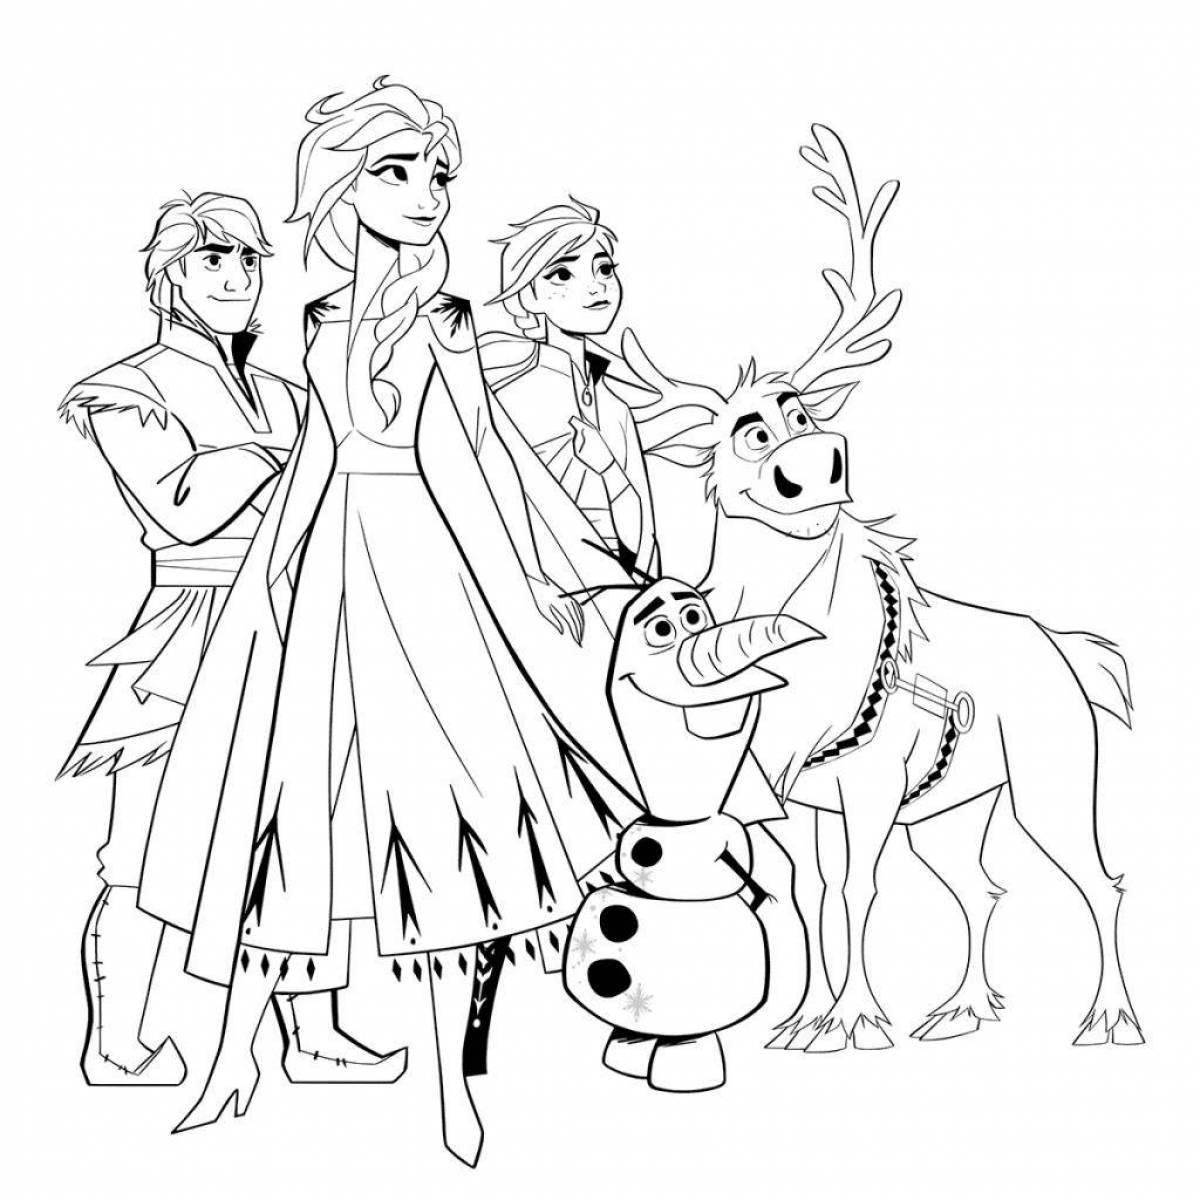 Elsa and anna in good quality #2